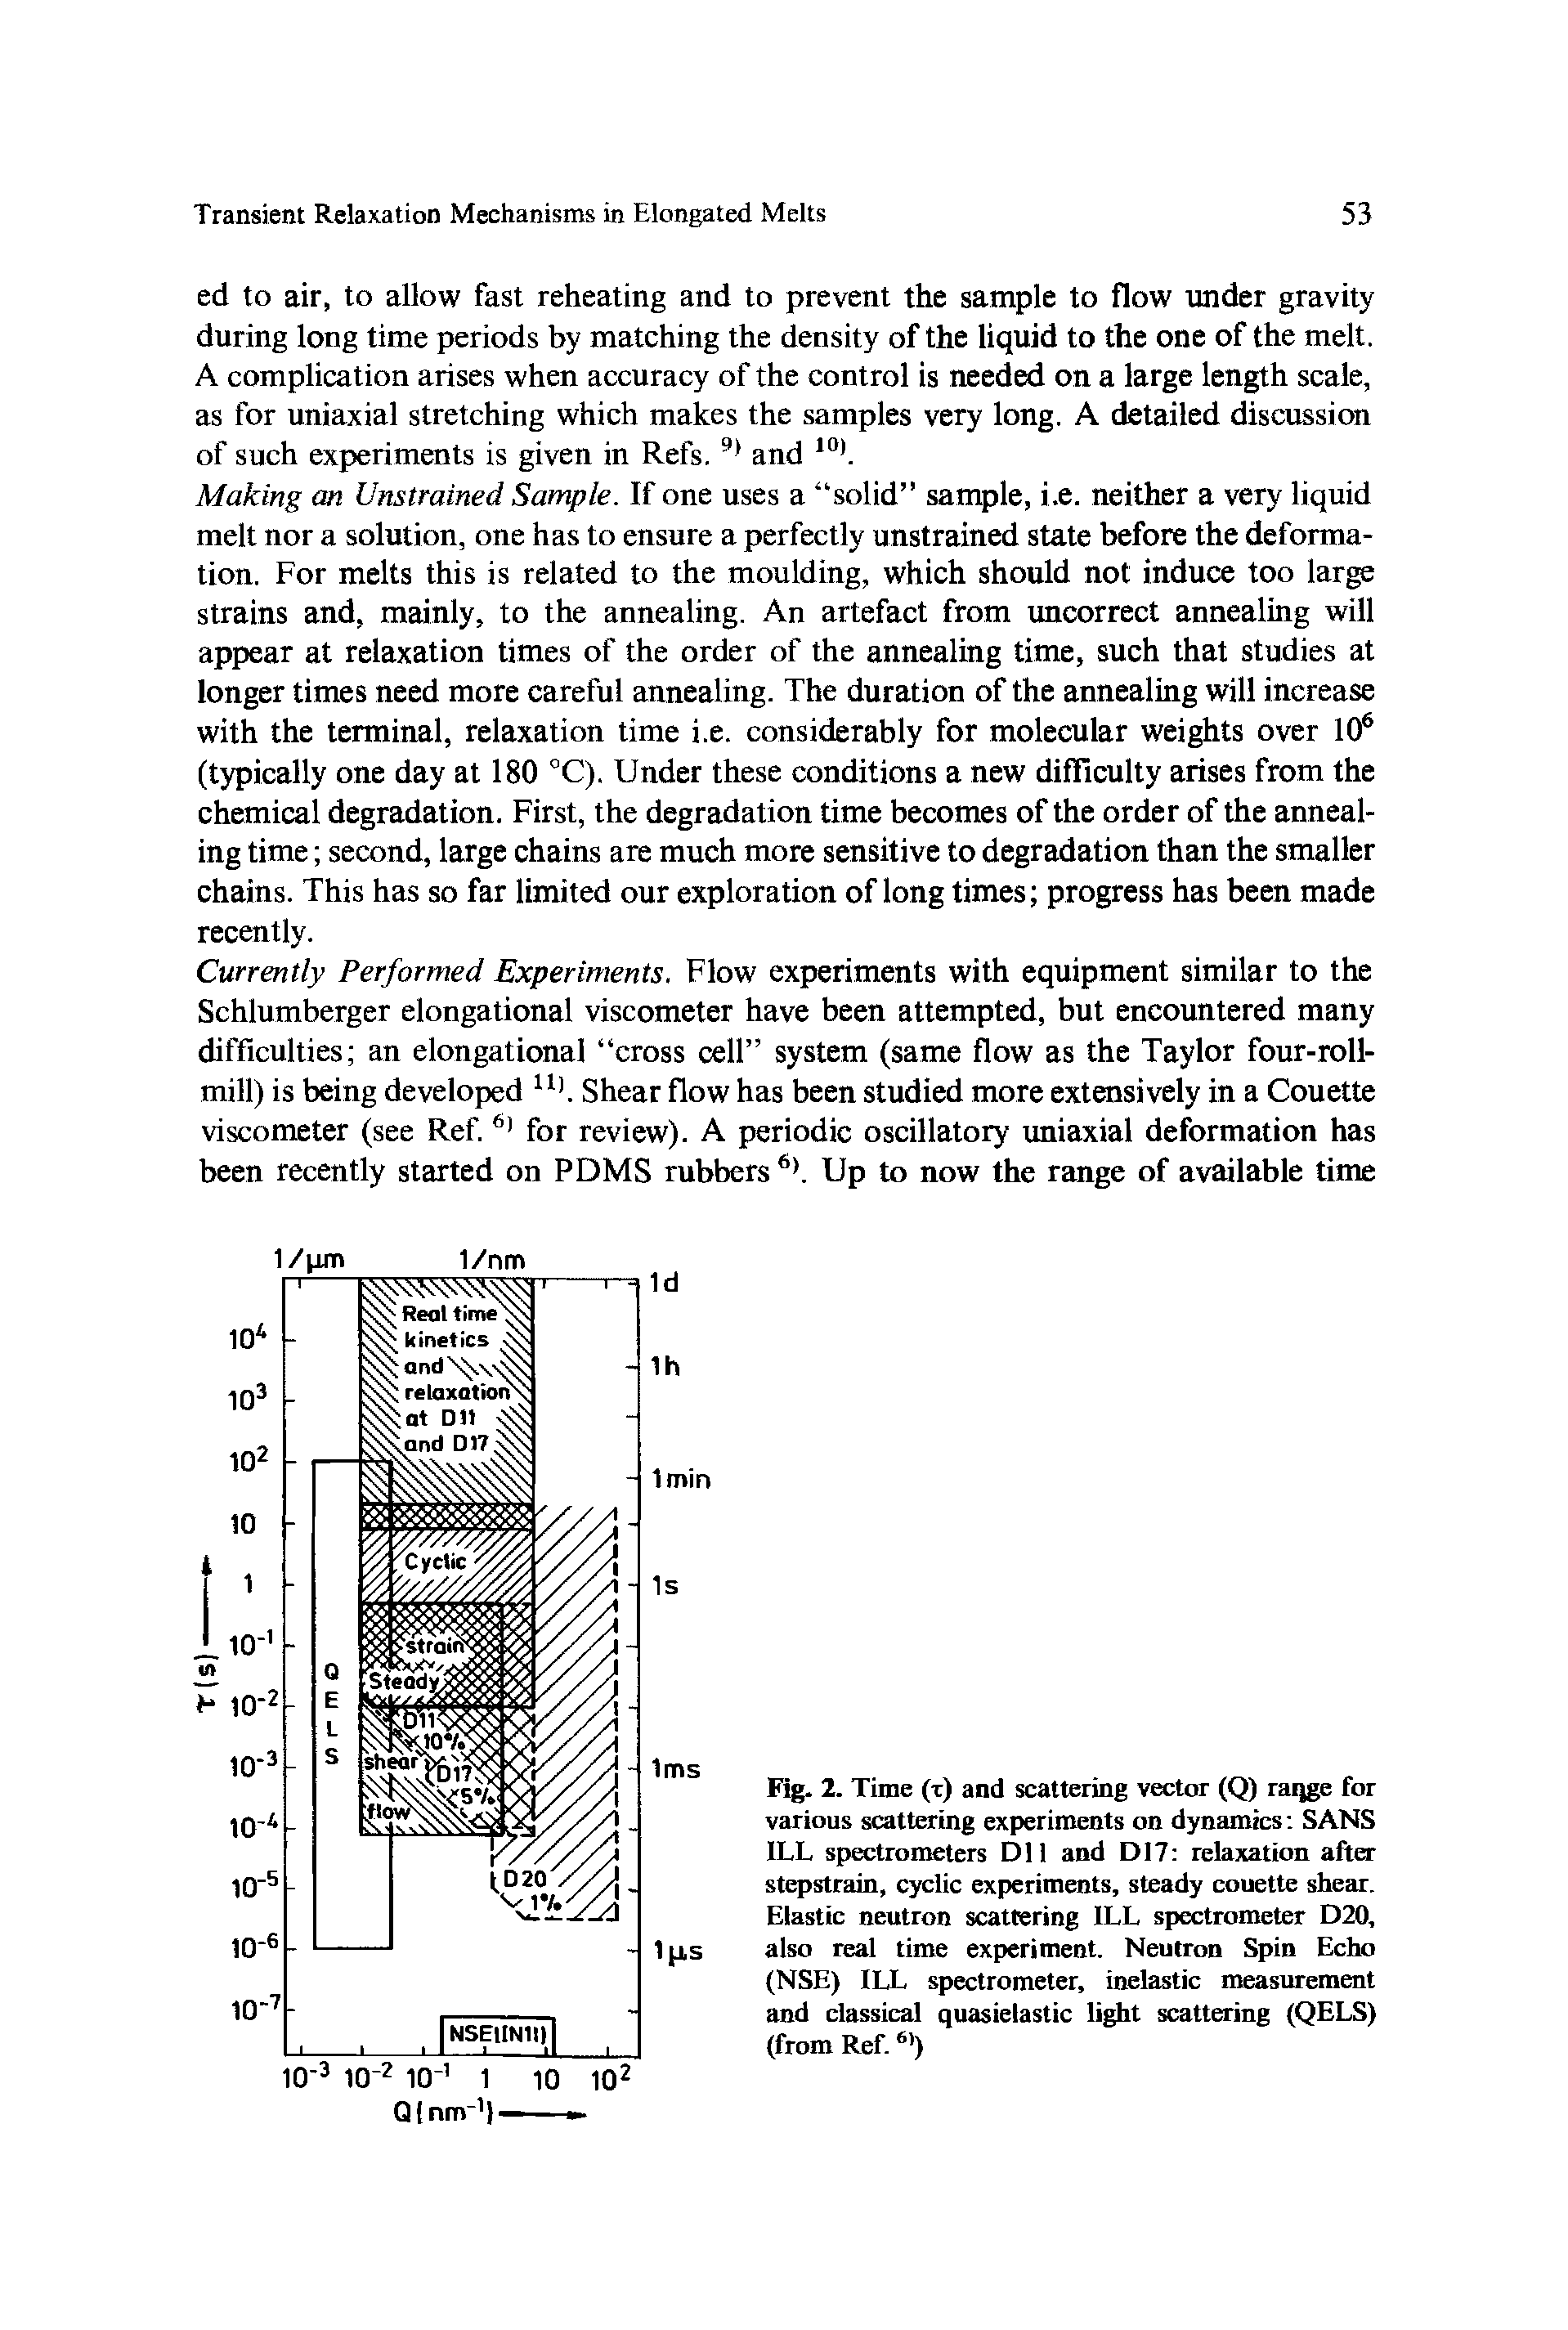 Fig. 2. Time (x) and scattering vector (Q) raqge for various scattering experiments on dynamics SANS ILL spectrometers Dll and DI7 relaxation after stepstrain, cyclic experiments, steady couette shear. Elastic neutron scattering ILL spectrometer D20, also real time experiment. Neutron Spin Echo (NSE) ILL spectrometer, inelastic measurement and classical quasielastic light scattering (QELS) (from Ref. )...